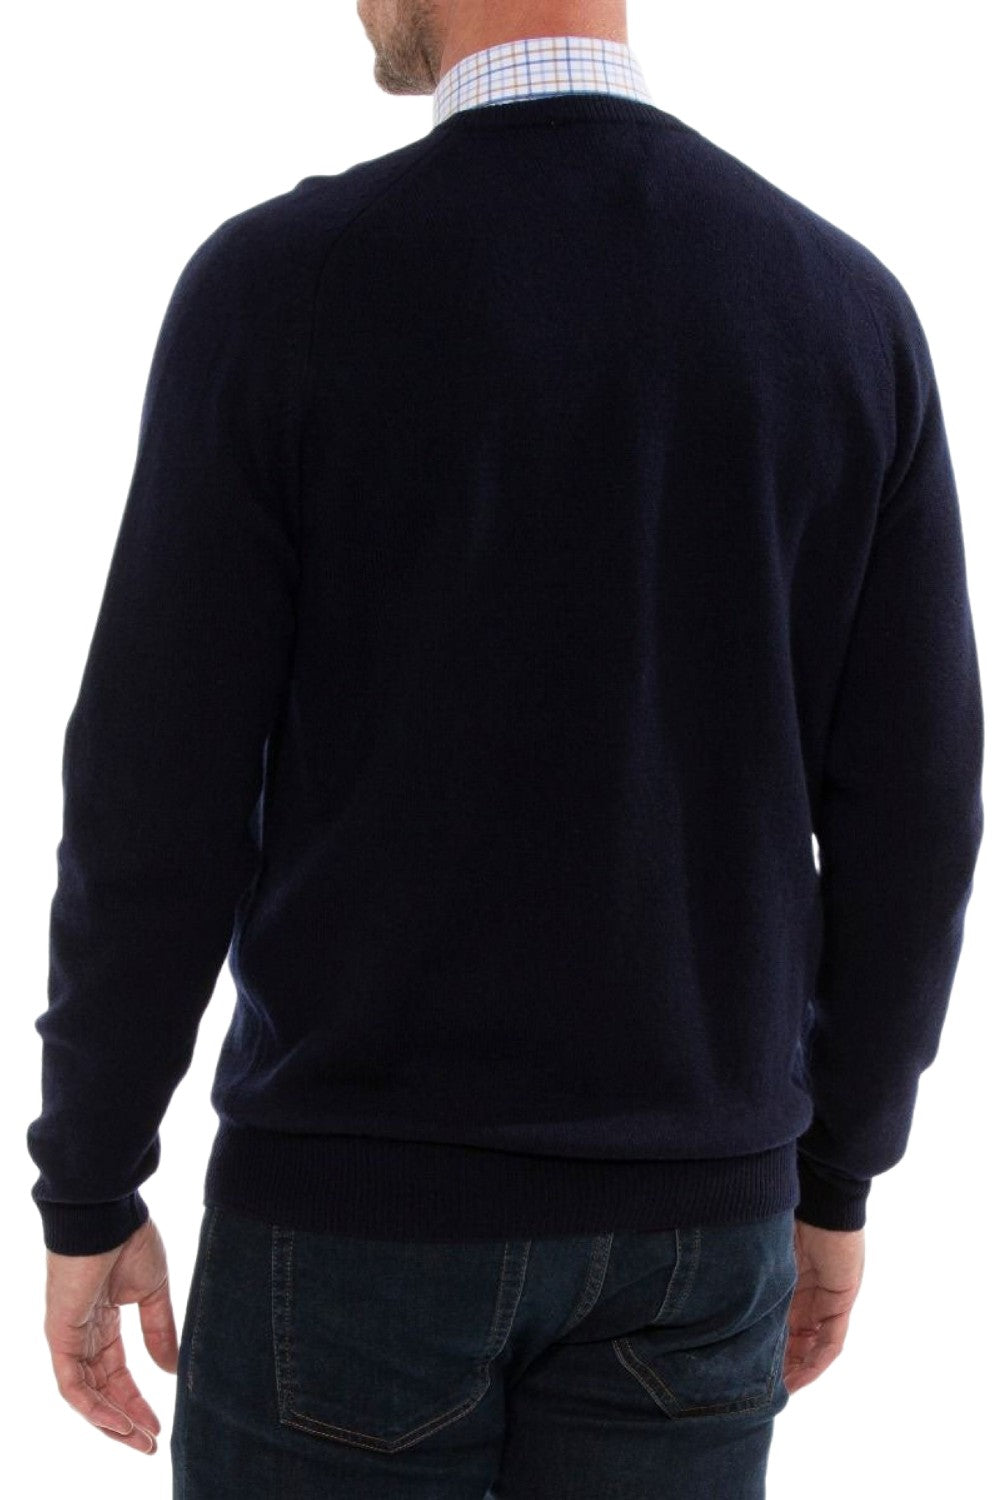 Alan Paine Streetly Lambswool V Neck Jumper in Navy 